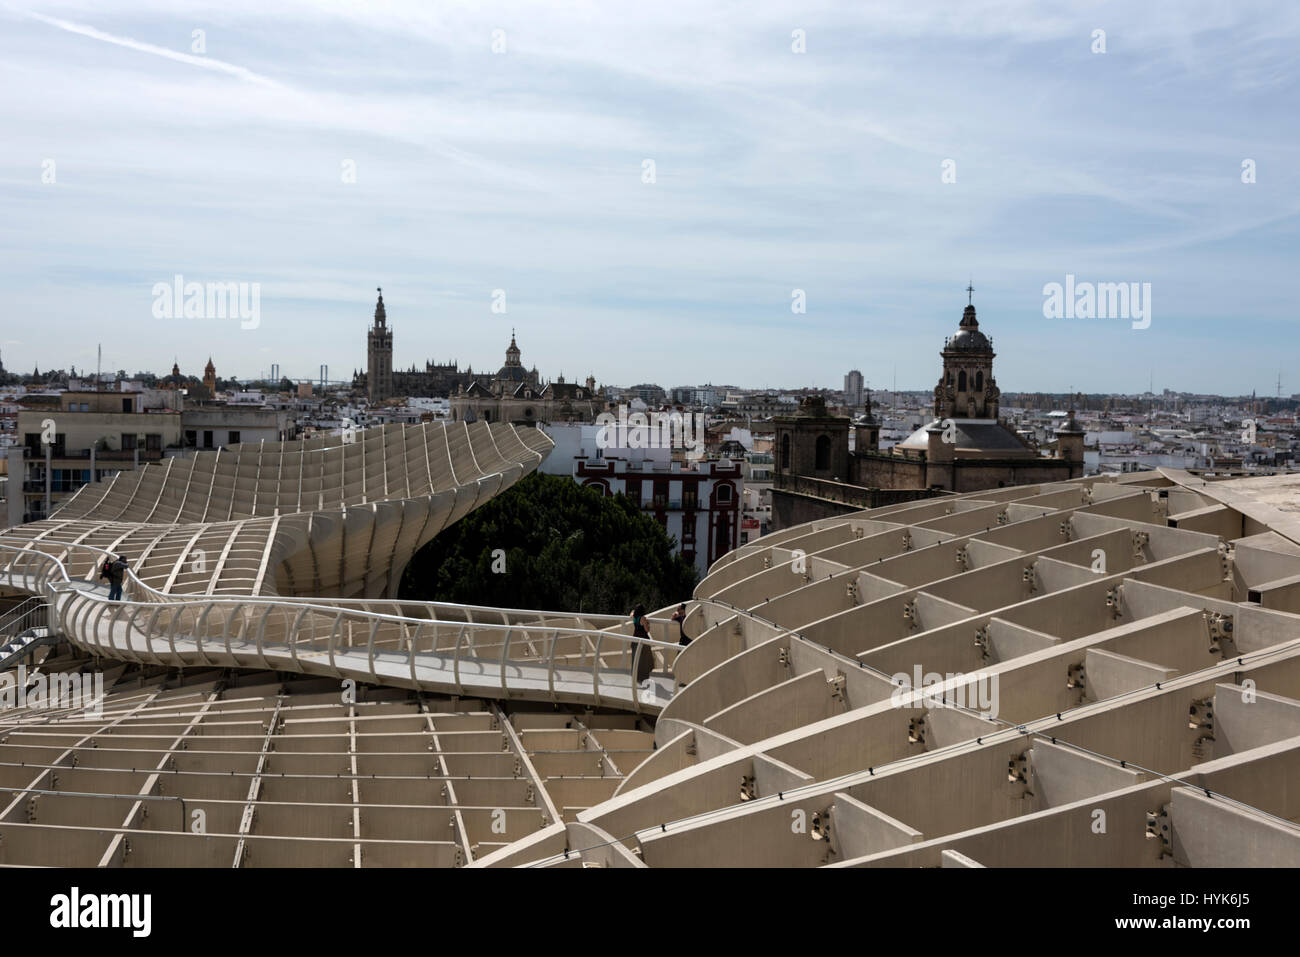 Skyline of Seville from the top ofv the Metropol Parasol, located at La Encarnacion Plaza (square) in the Old Town of Seville in Andulisa Province, So Stock Photo